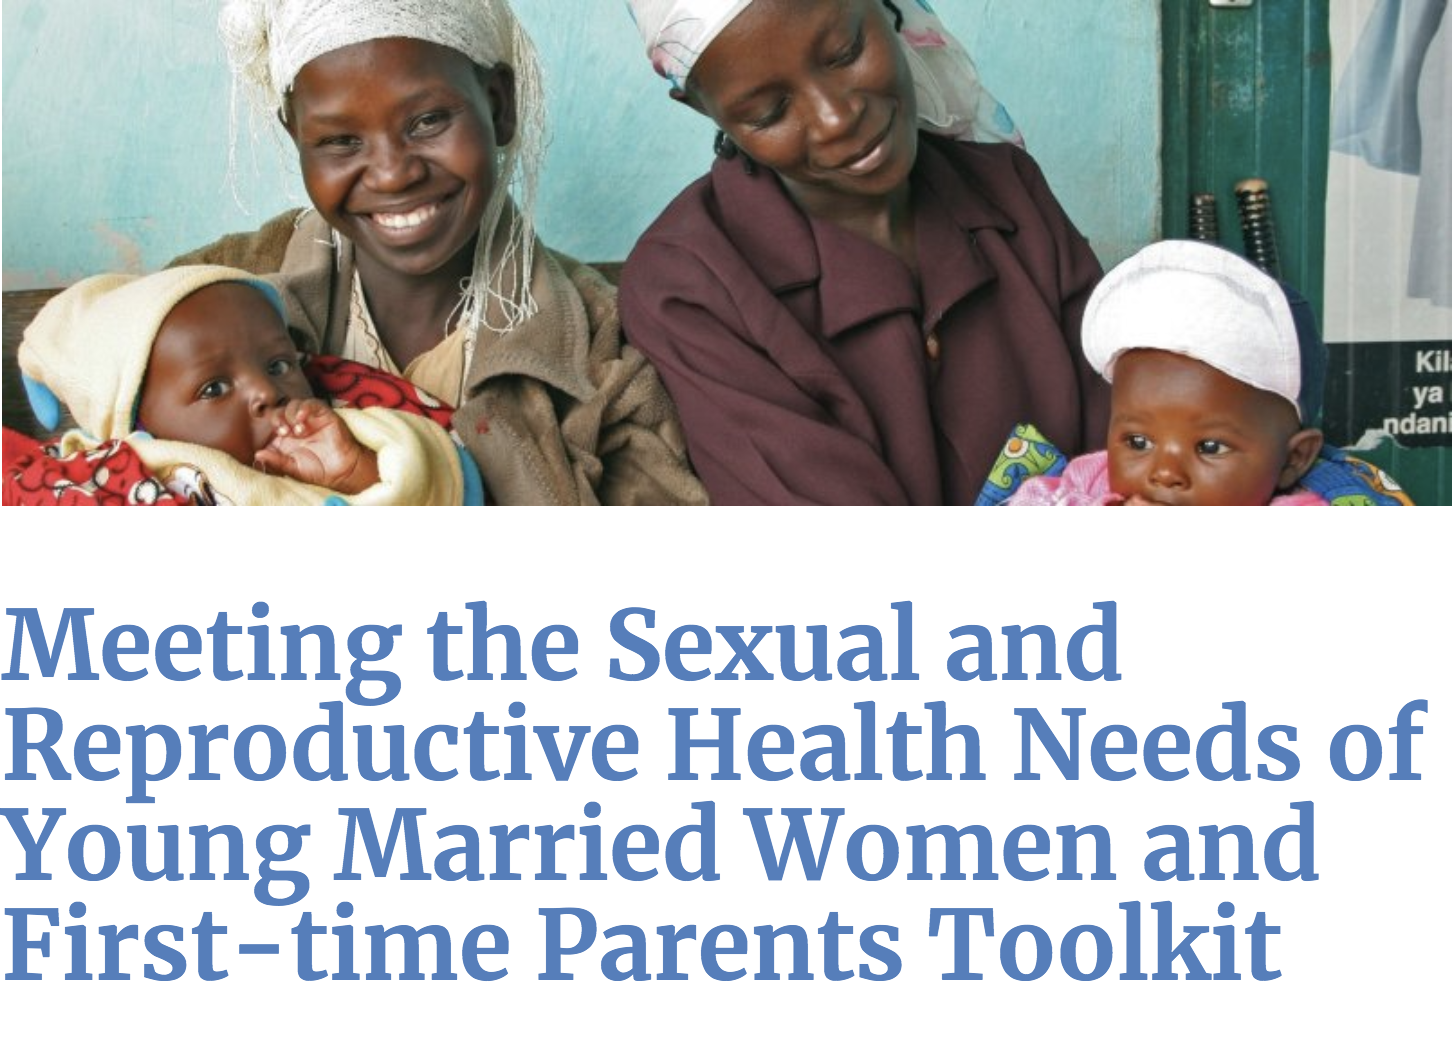 Integrating Family Planning and Maternal and Child Health Care: Saving Lives, Money, and Time